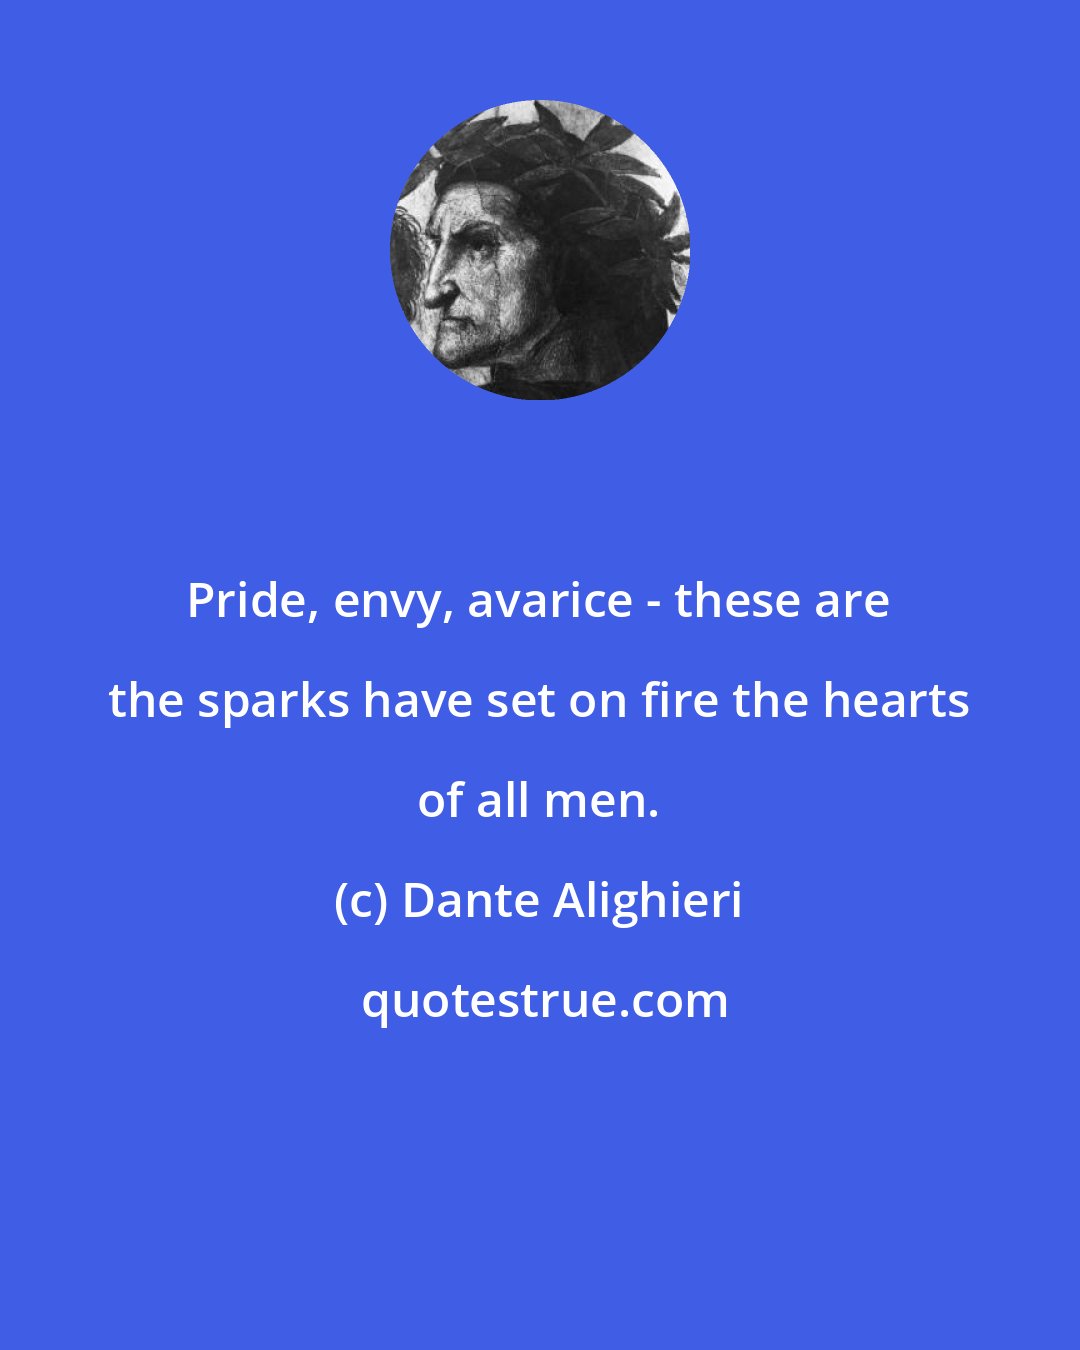 Dante Alighieri: Pride, envy, avarice - these are the sparks have set on fire the hearts of all men.